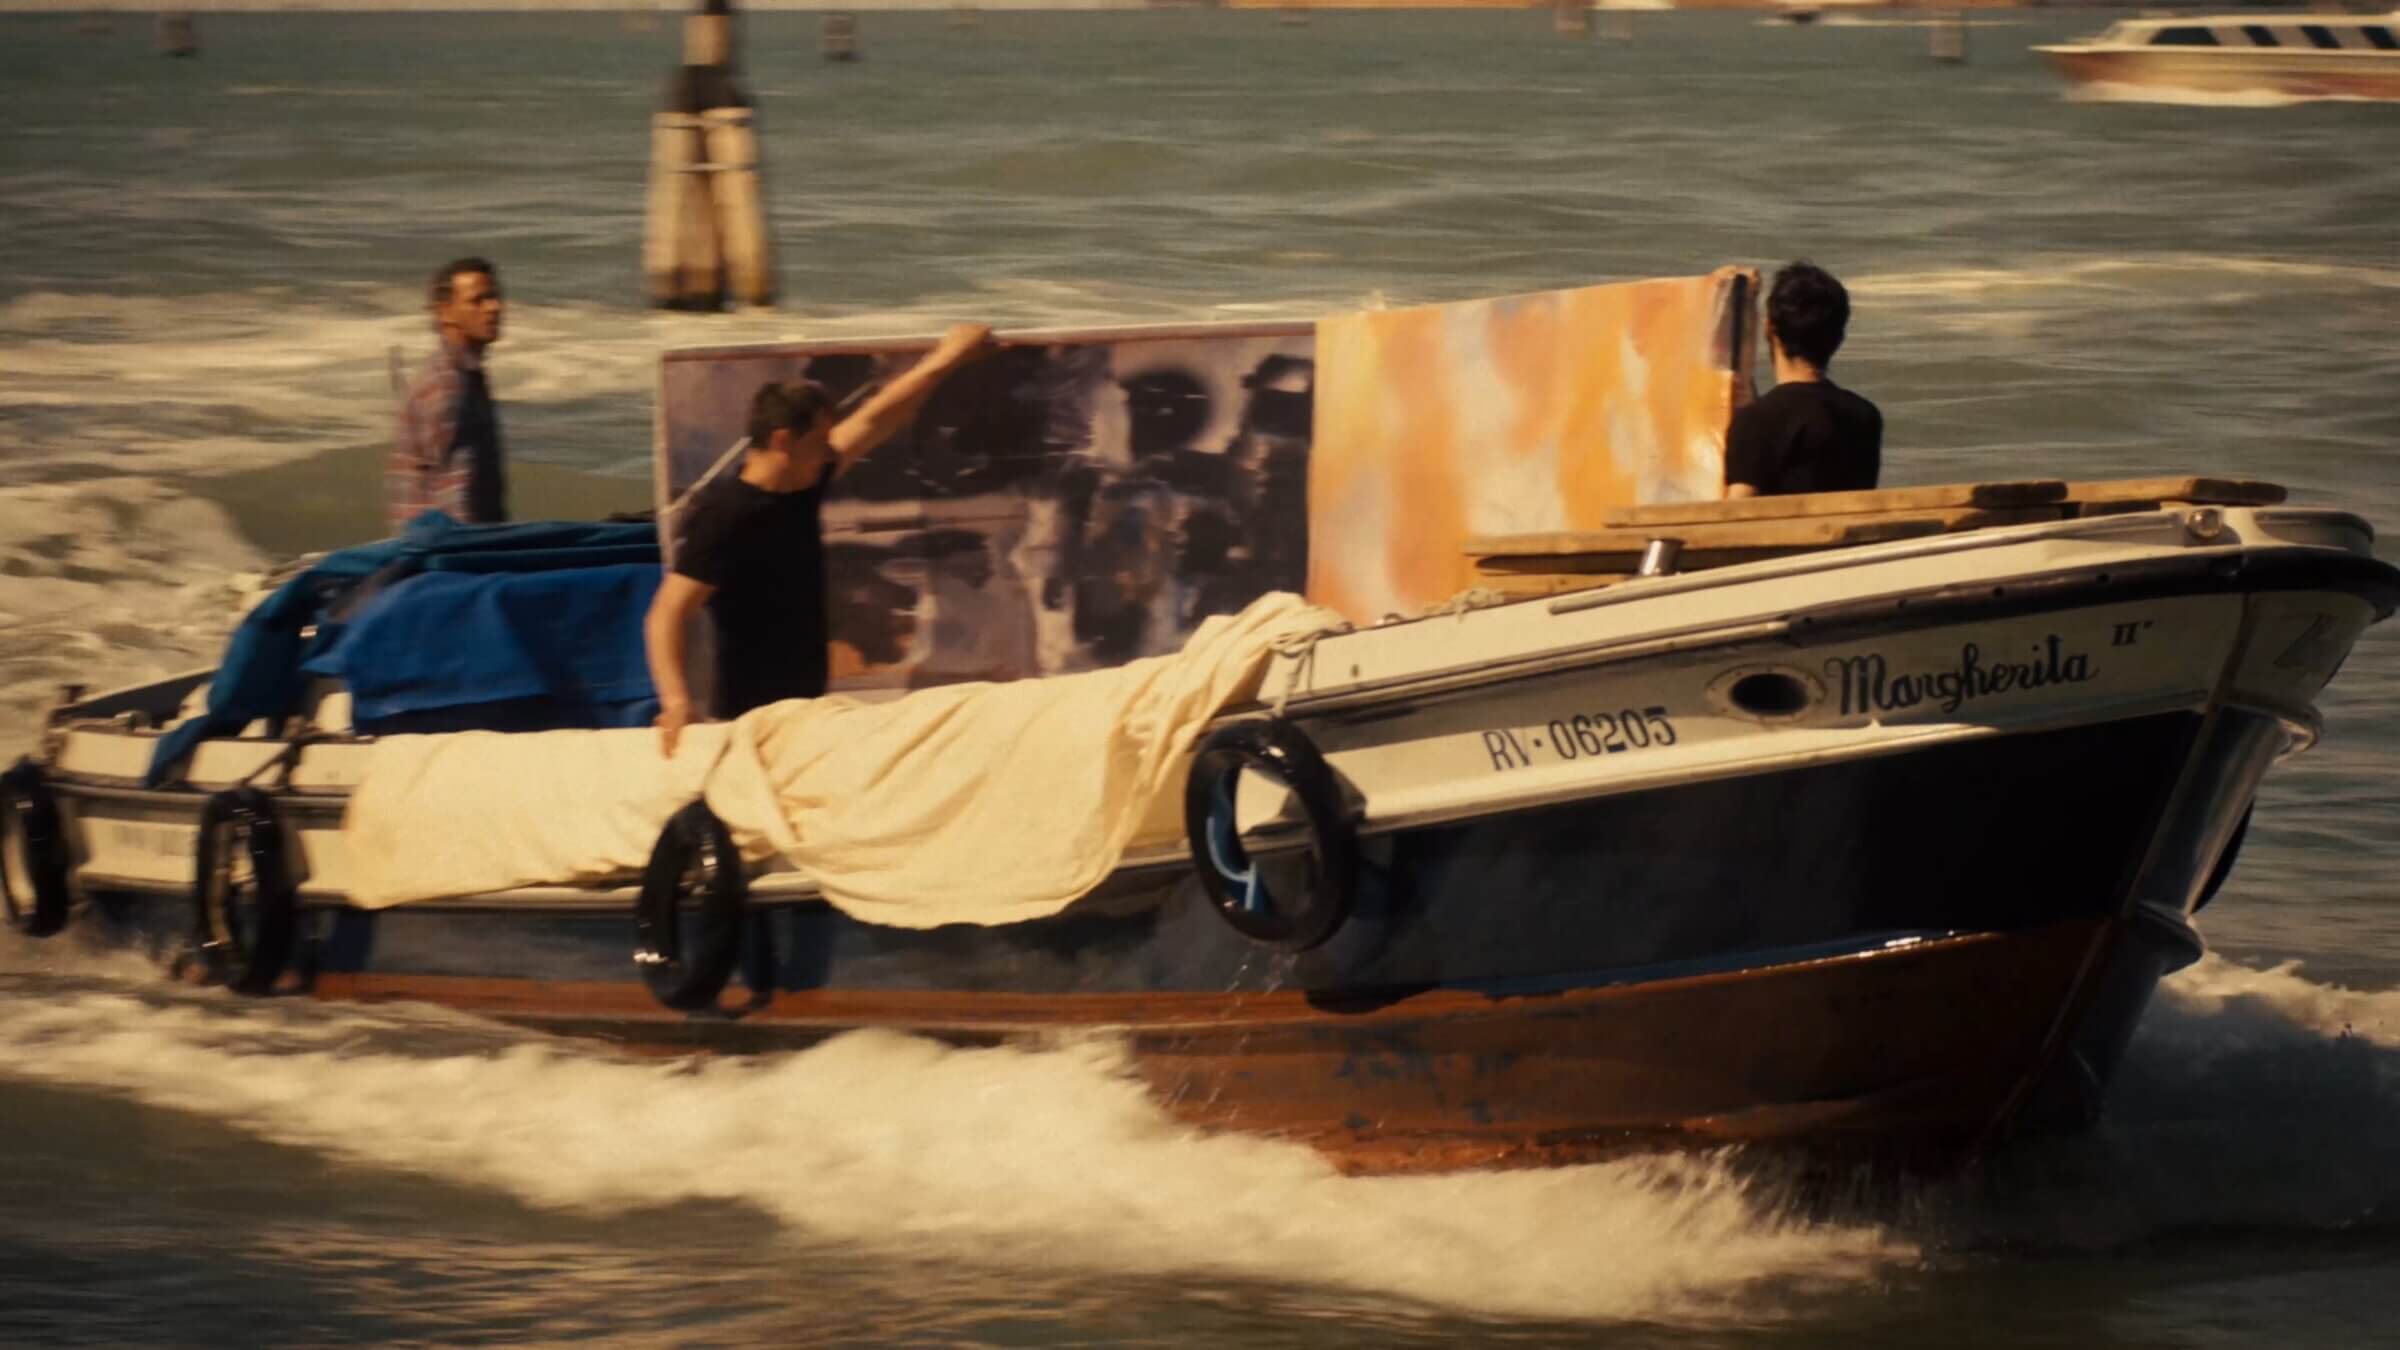 'Taking Venice' recreates he 1964 transport of Robert Rauschenberg’s work for exhibition at the 1964 Venice Biennale.